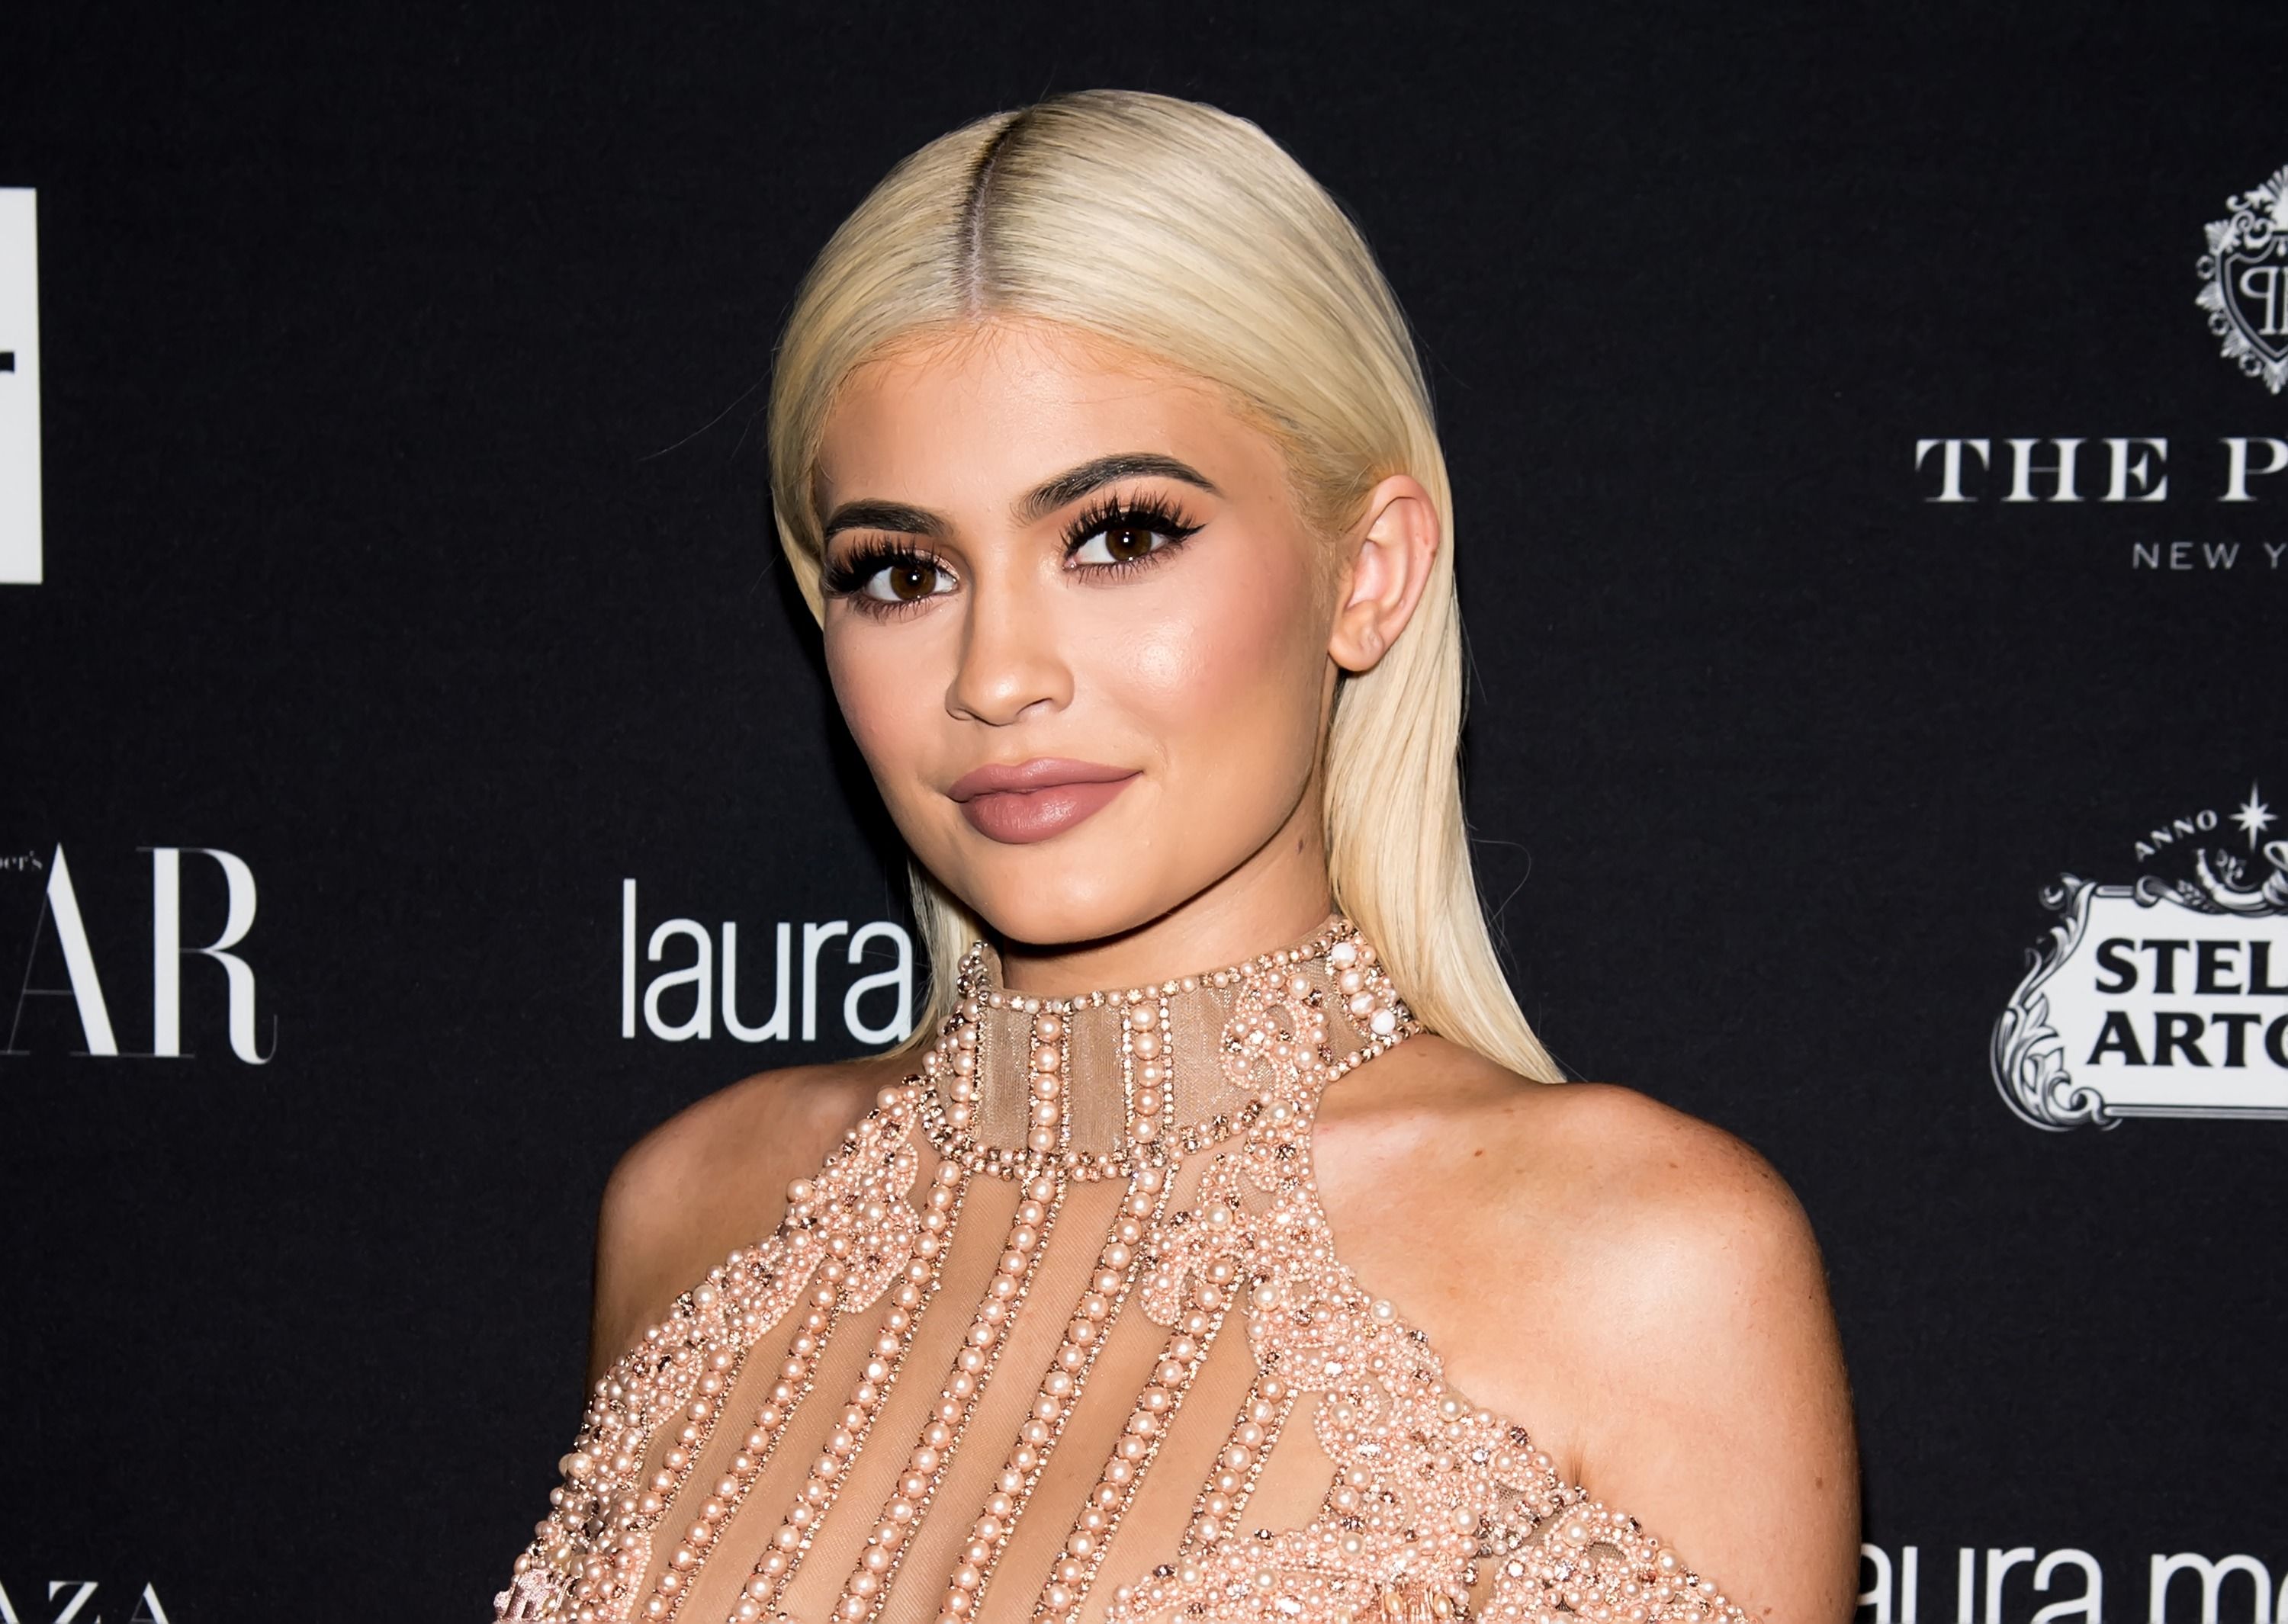 "Keeping Up With the Kardashian's star Kylie Jenner at Harper's BAZAAR Celebrates 'ICONS By Carine Roitfeld' at The Plaza Hotel in New York City| Photo: Gilbert Carrasquillo/Getty Images